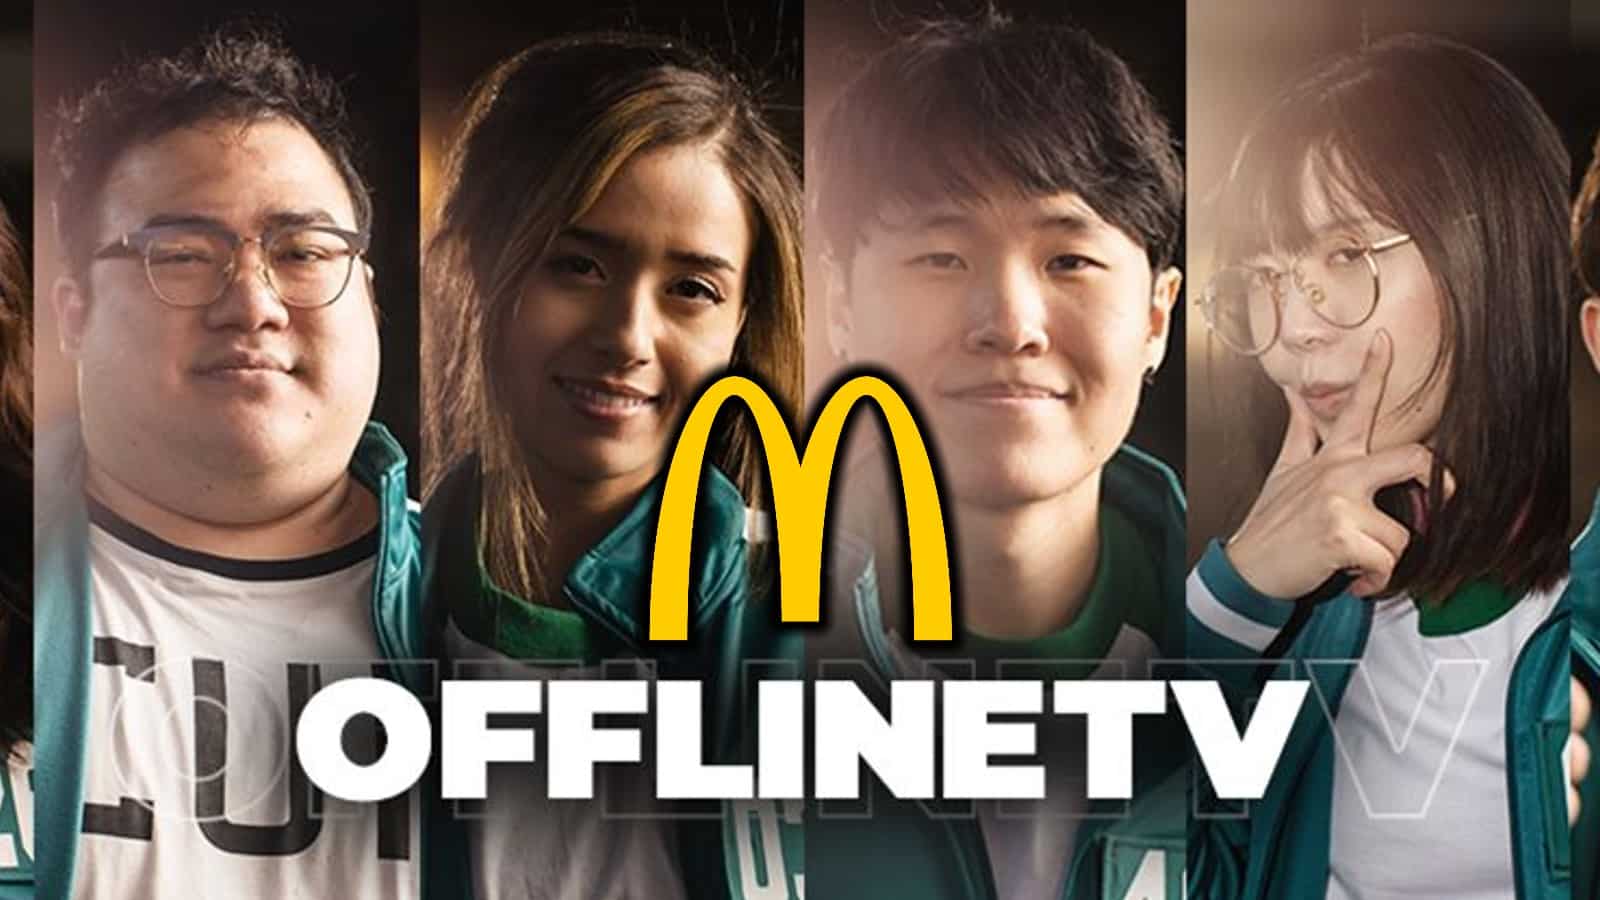 OfflineTv Twitter cover photo with McDonald's logo